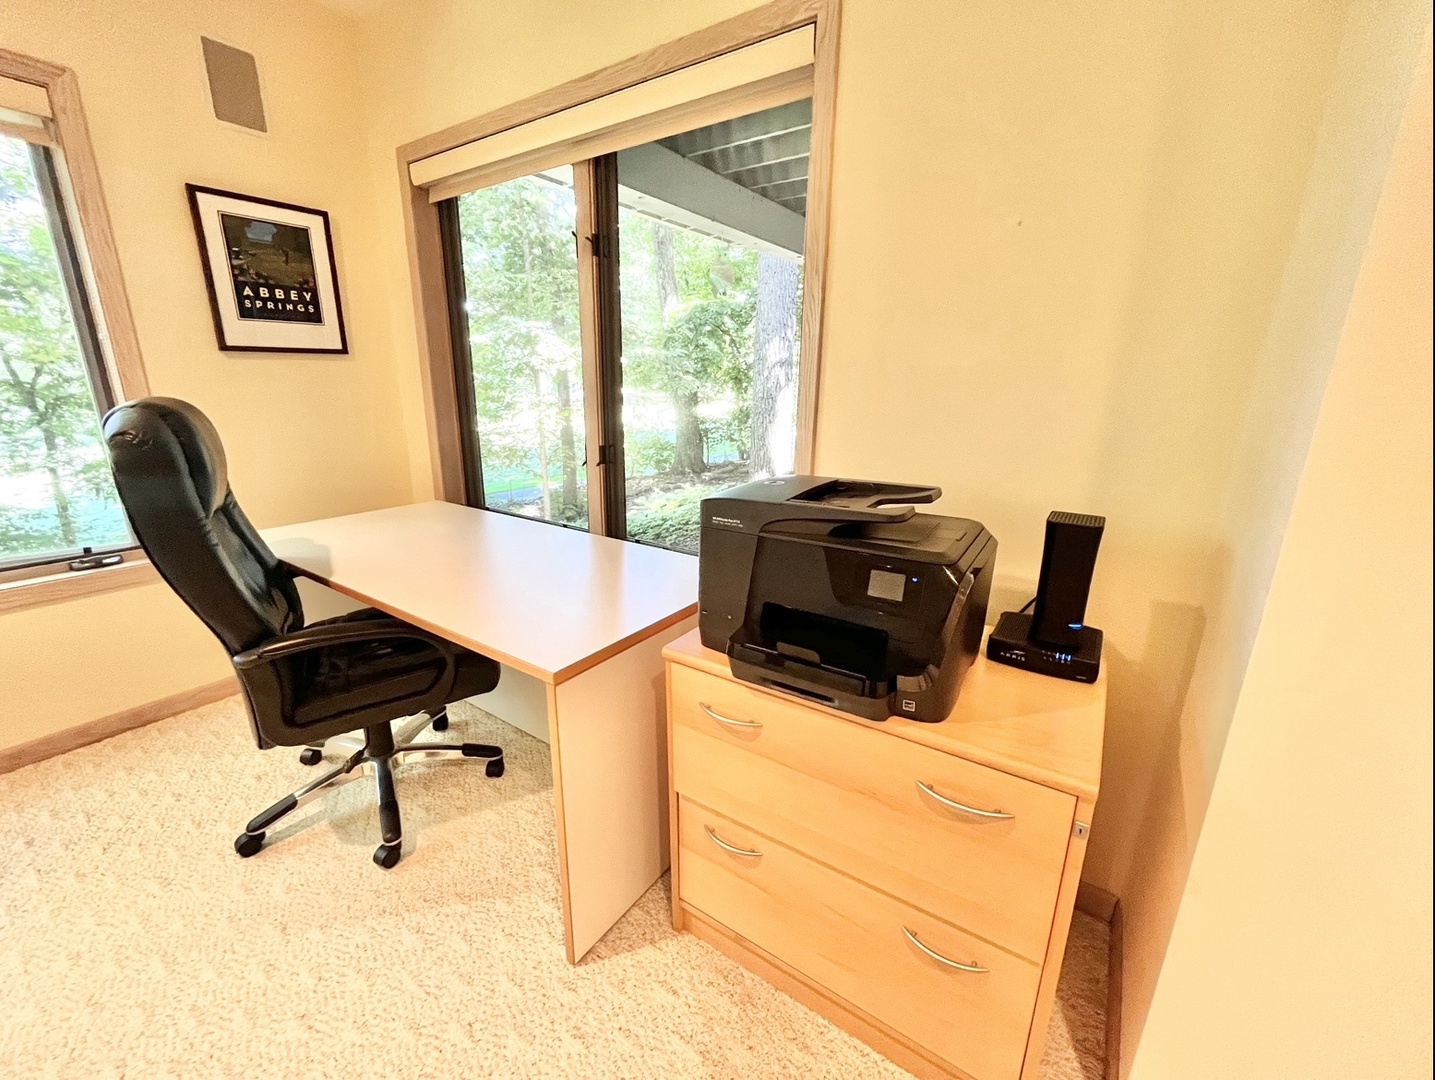 The walk-out lower-level desk workspace is an ideal spot for catching up on some work